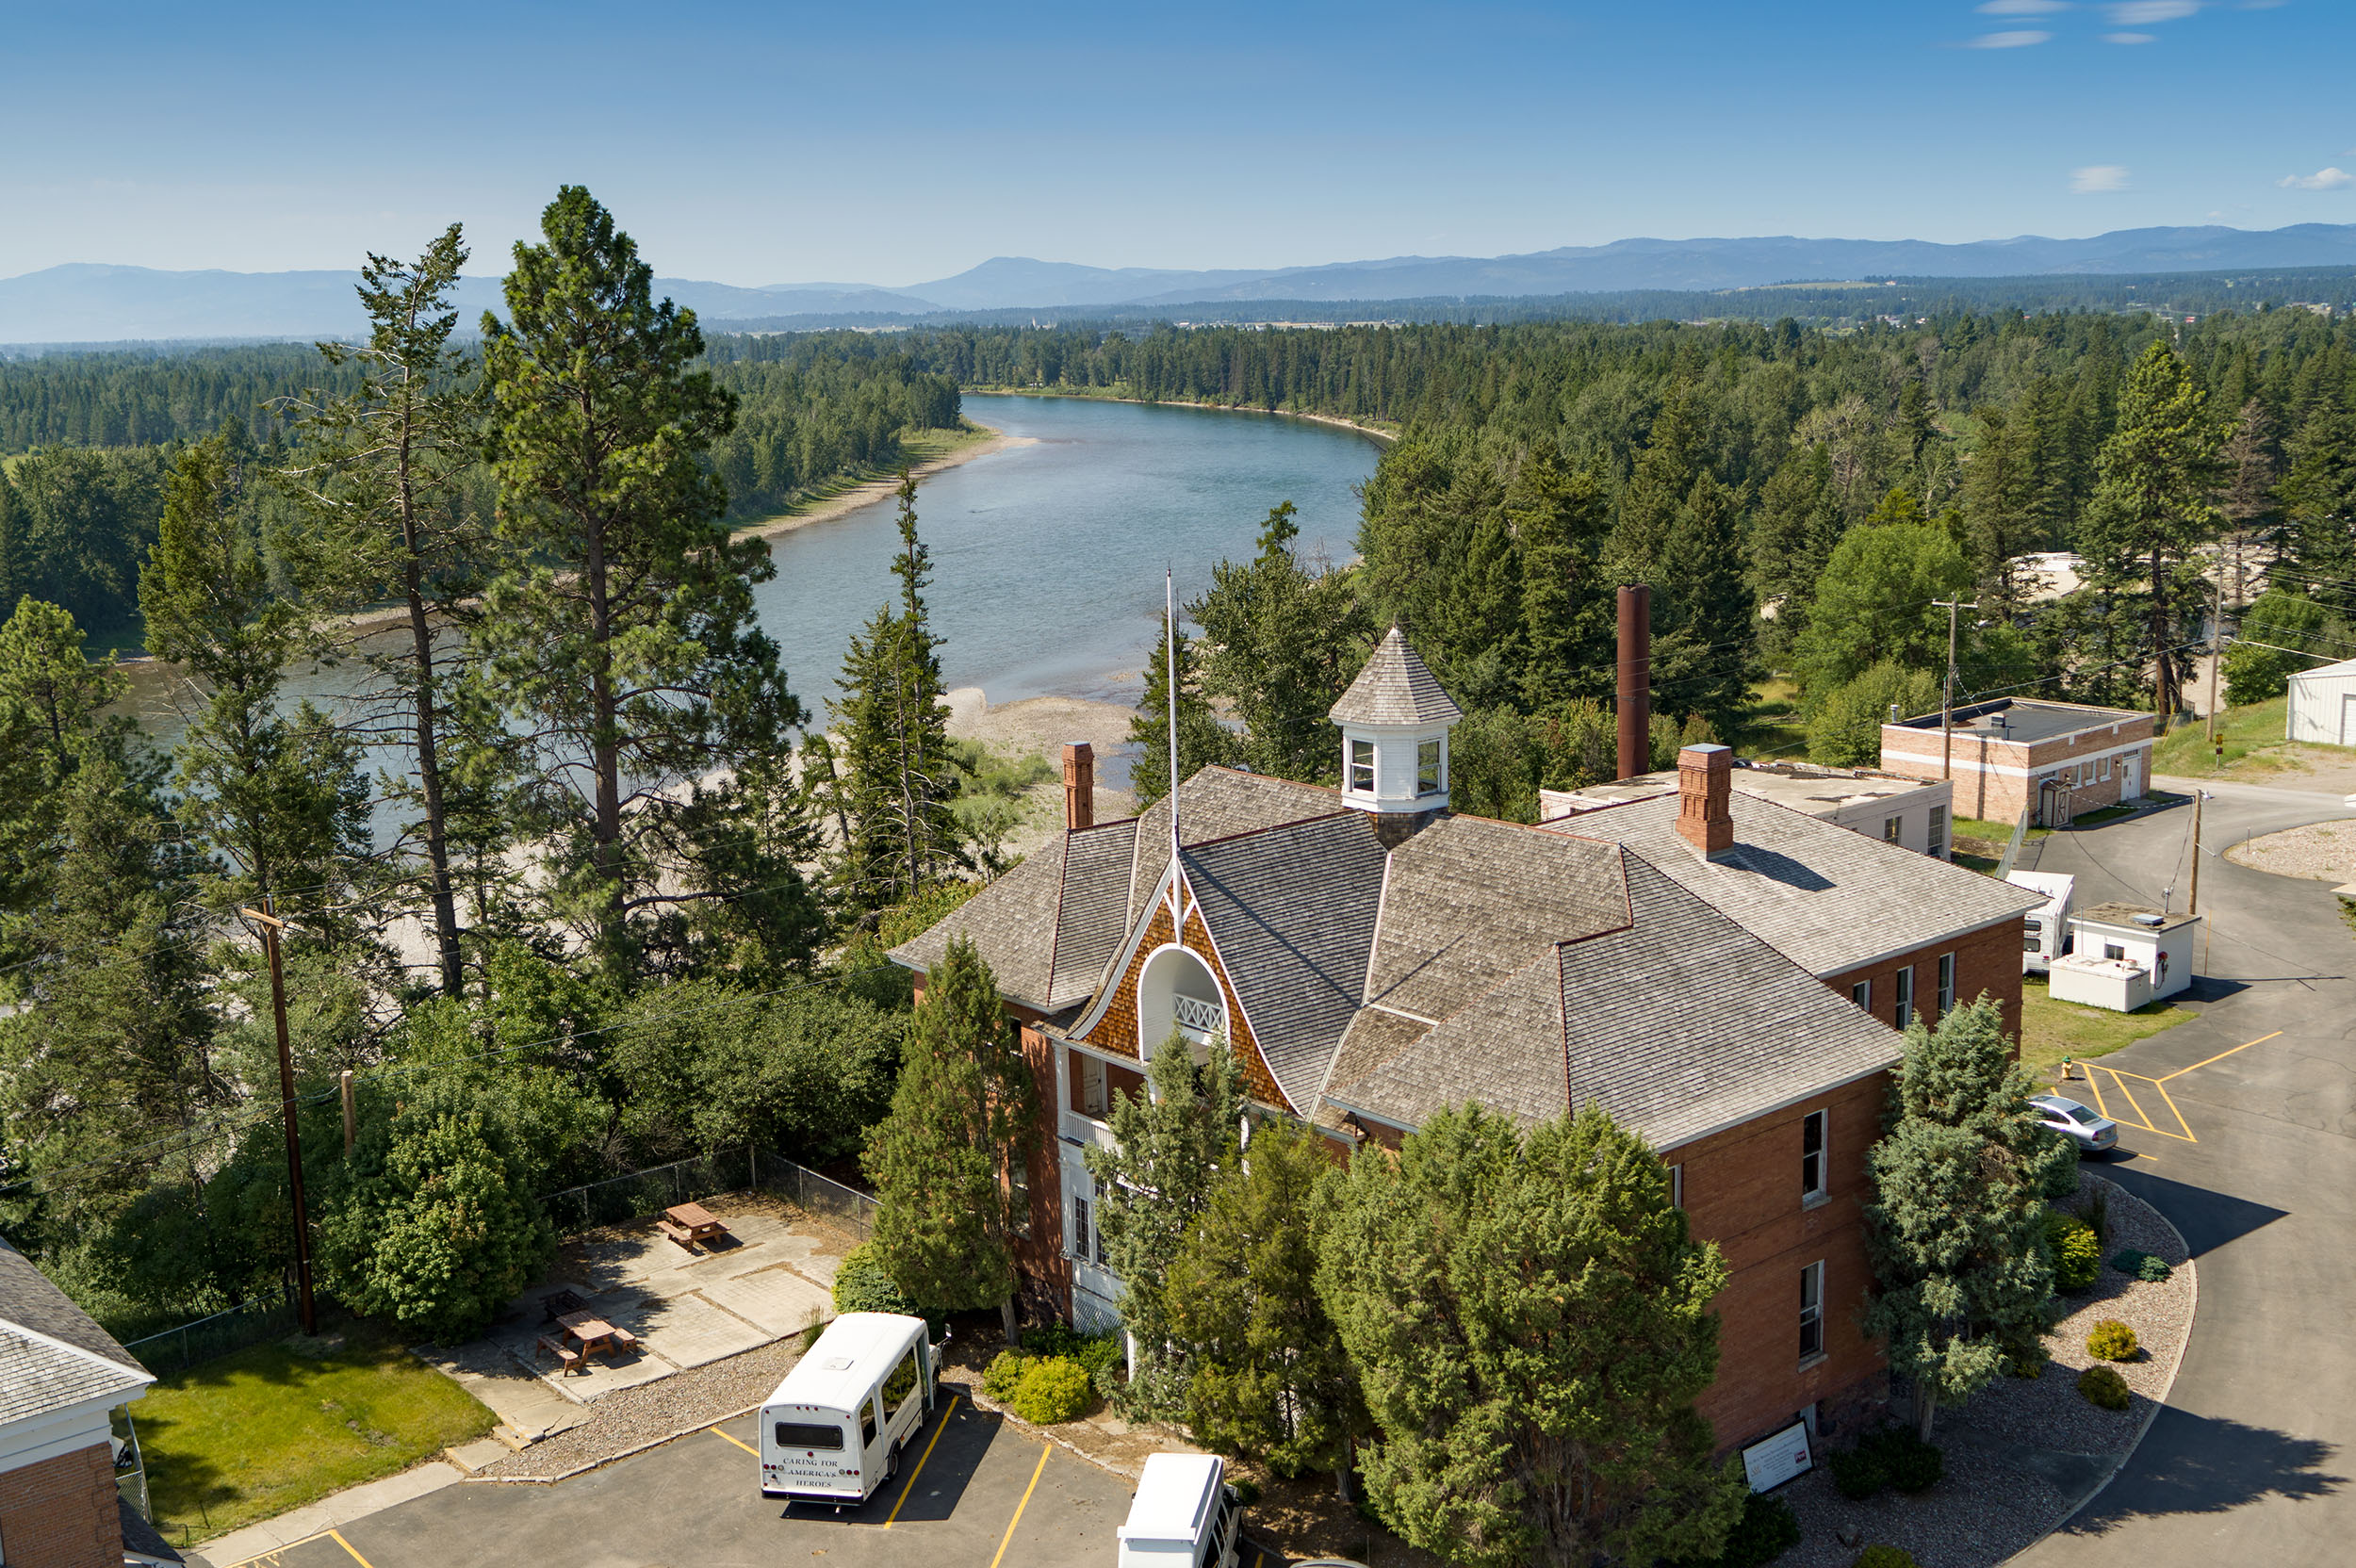 An aerial view of one of the main buildings on the Veterans home campus. The flathead river is in the background.